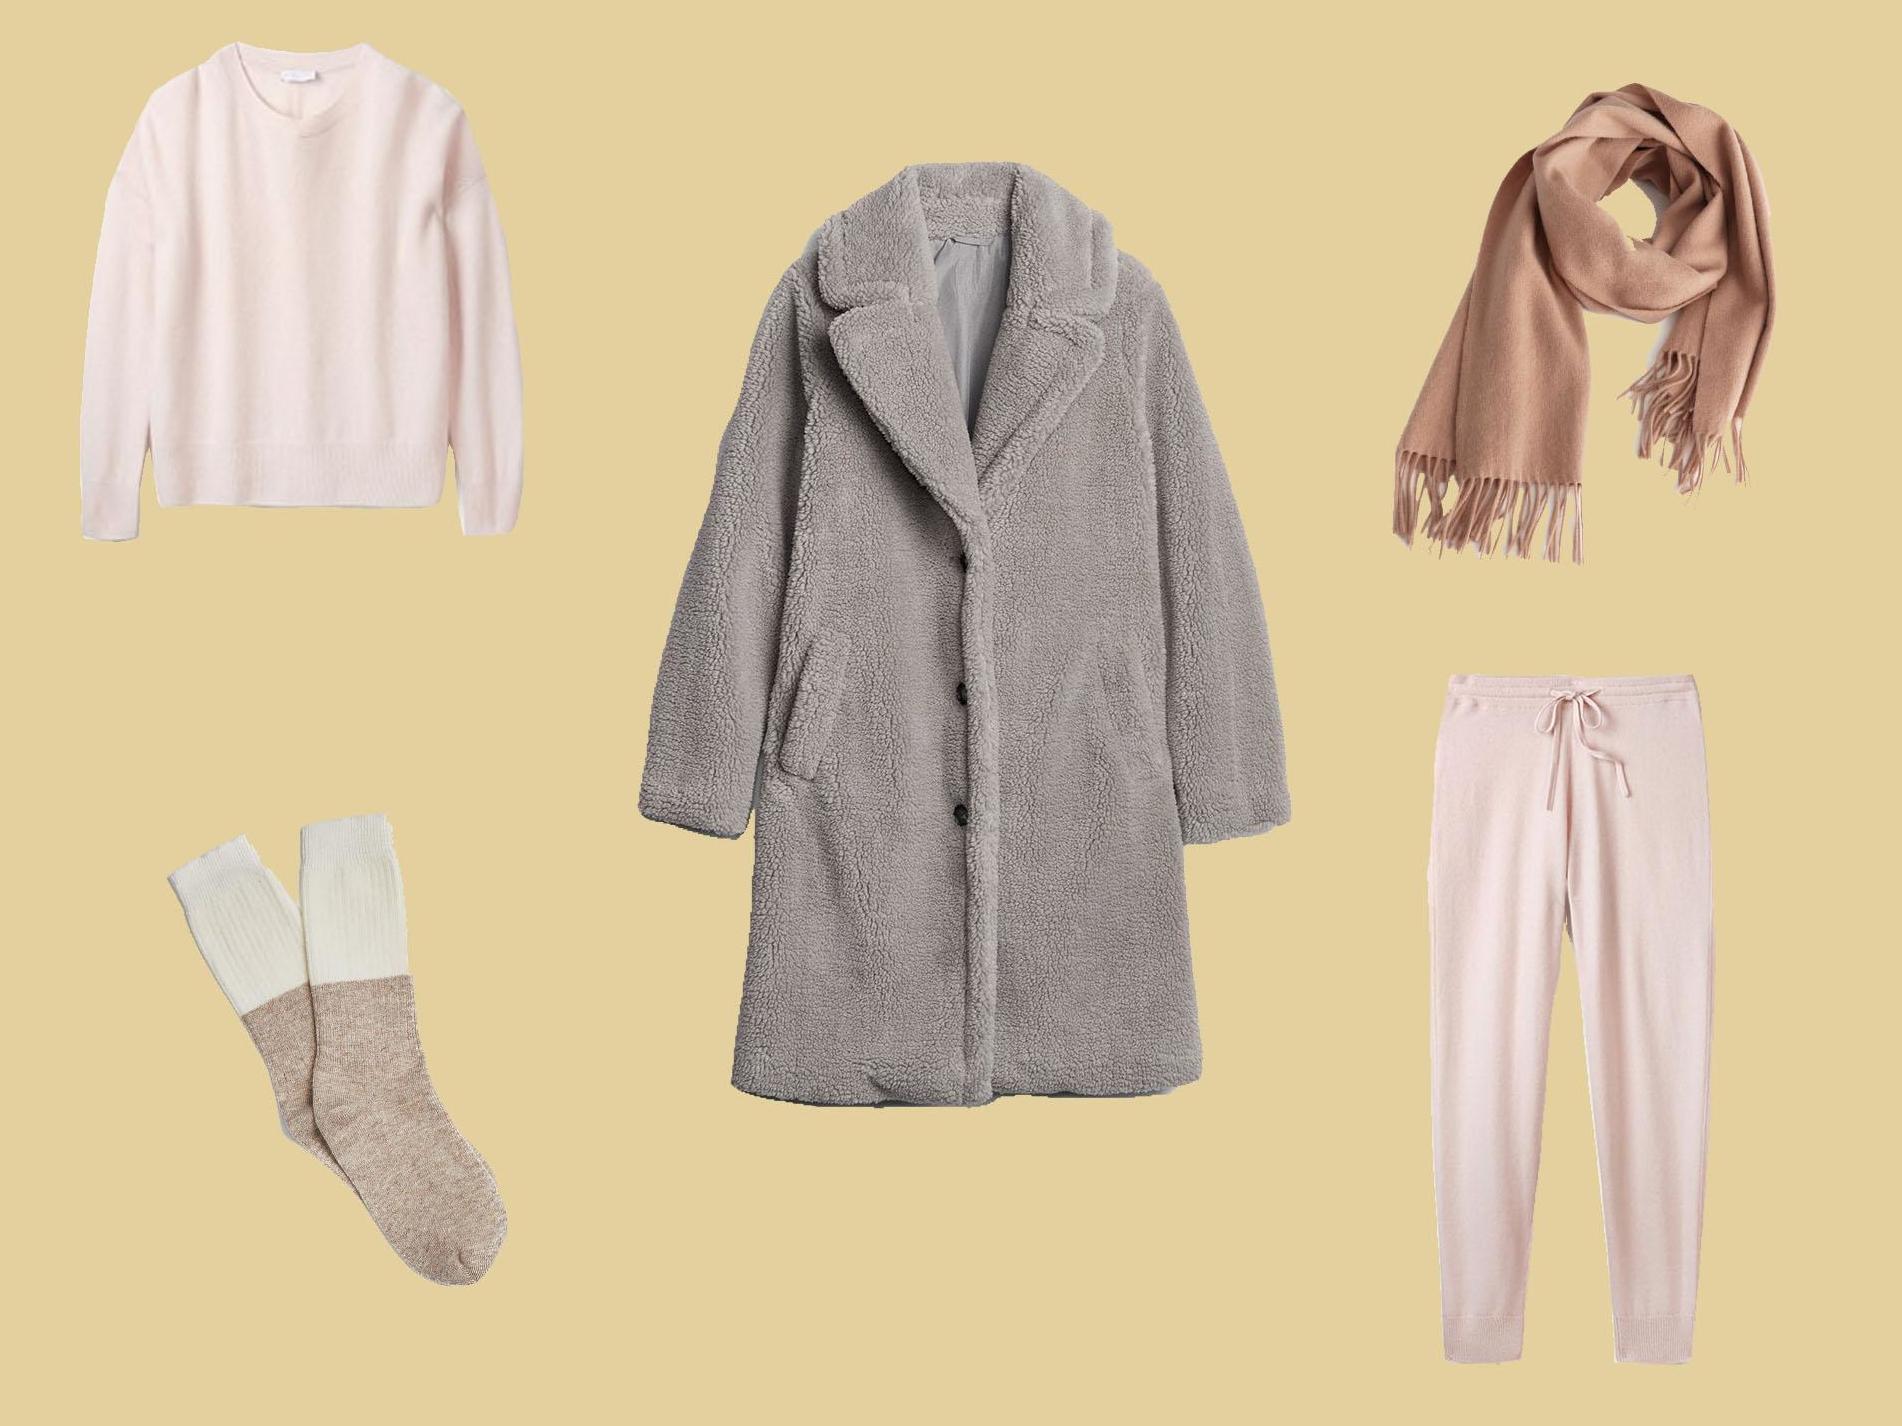 Cashmere Sweater, £169, The White Company; Cashmere Joggers, £169, The White Company; Teddy Coat, £89.95, Gap; Cream &amp; Camel Sleep Socks, £15, Yawn; Wool Fringed Blanket Scarf, £45, &amp; Other Stories